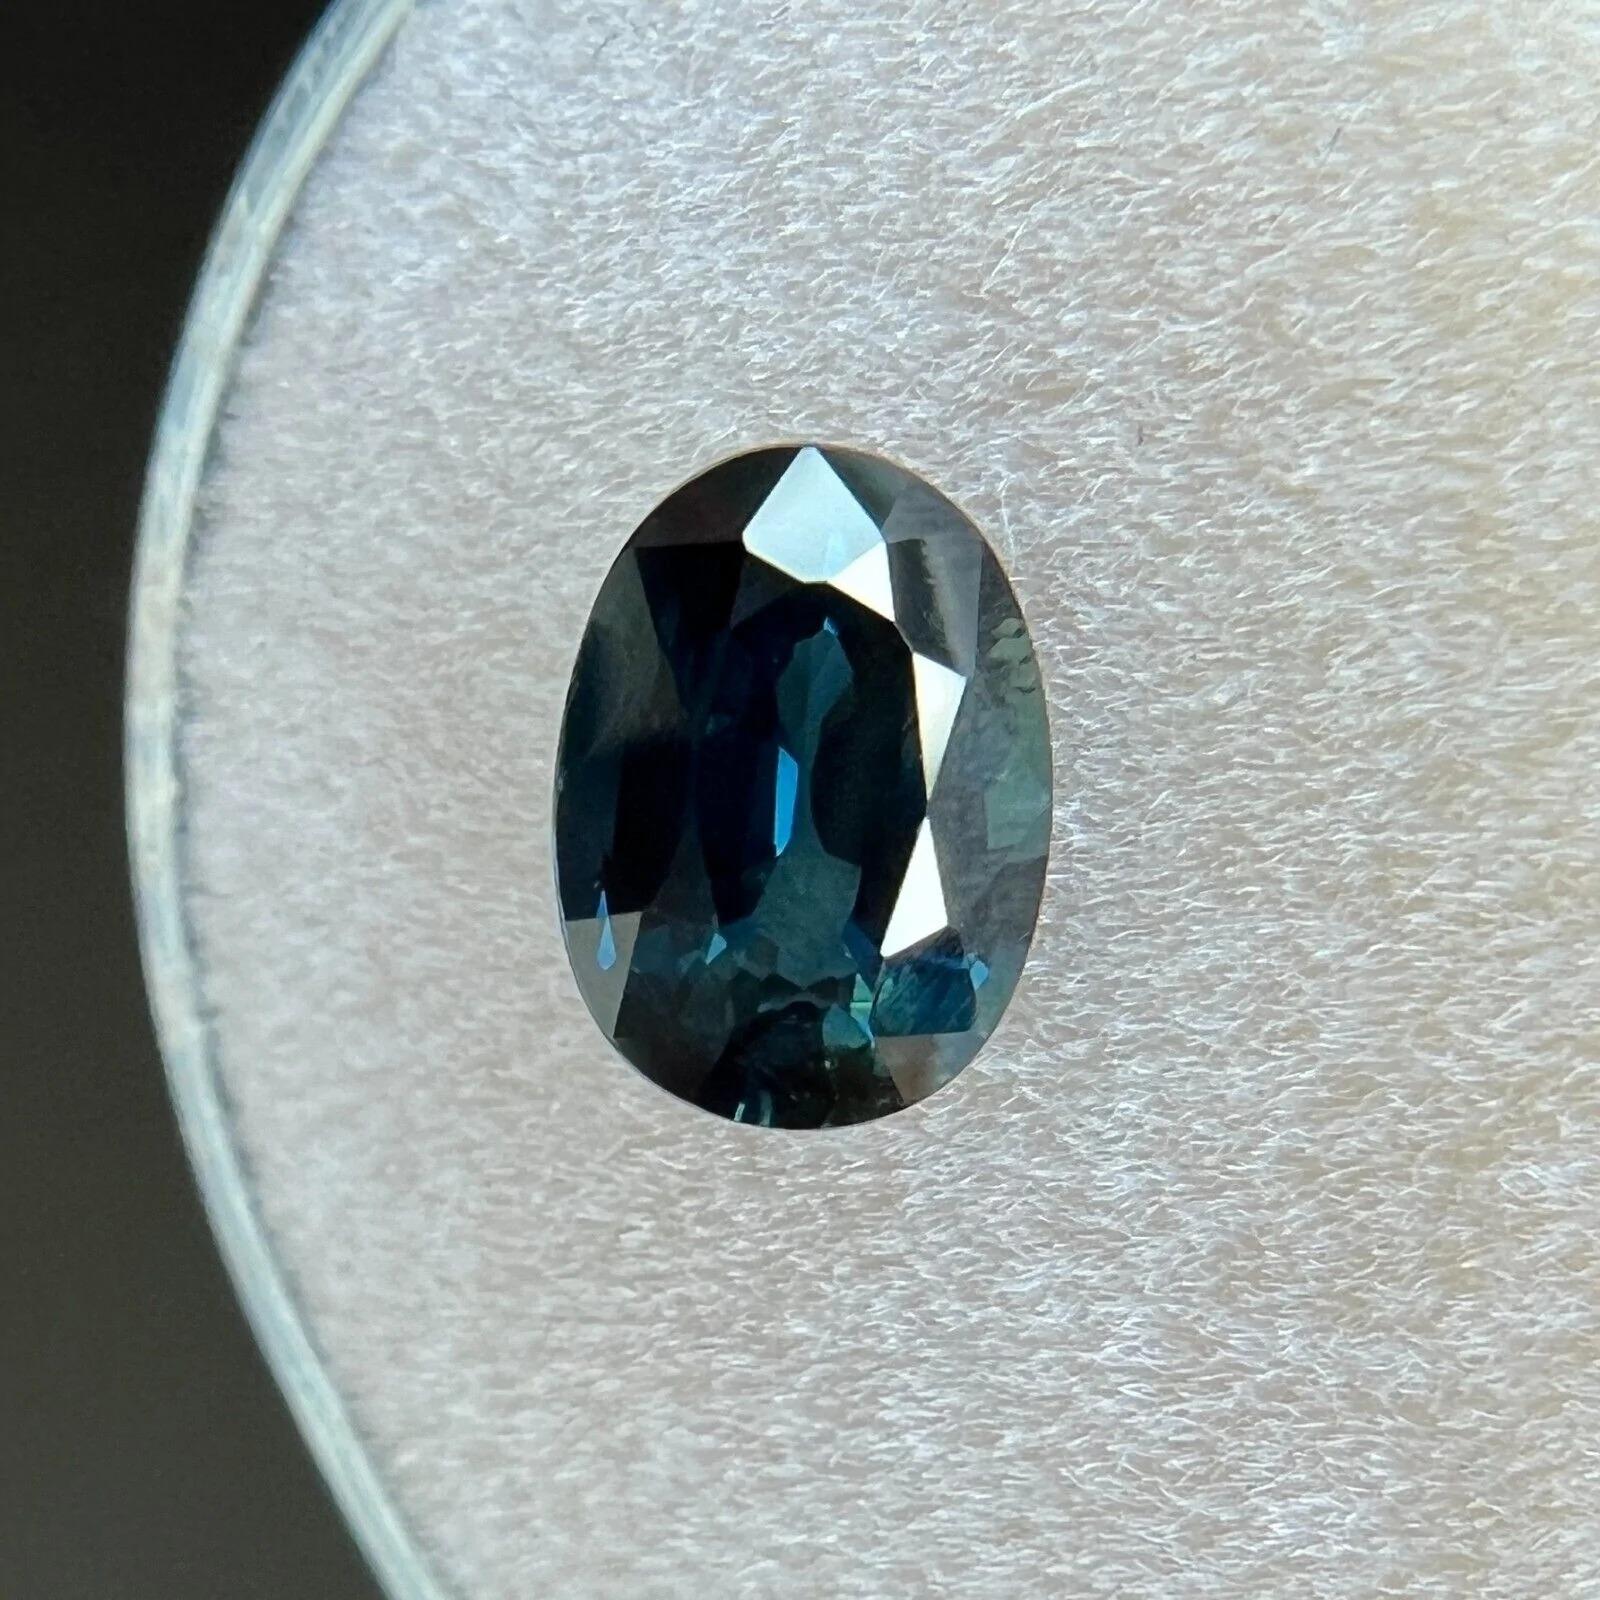 1.40ct Deep Green Blue Natural Sapphire Oval 'Egg' Cut Rare Gem 7.5x5.5mm

Natural Deep Green Blue Sapphire Gemstone.
1.40 Carat with a beautiful deep green blue colour and good clarity, a clean stone with only some small natural inclusions visible